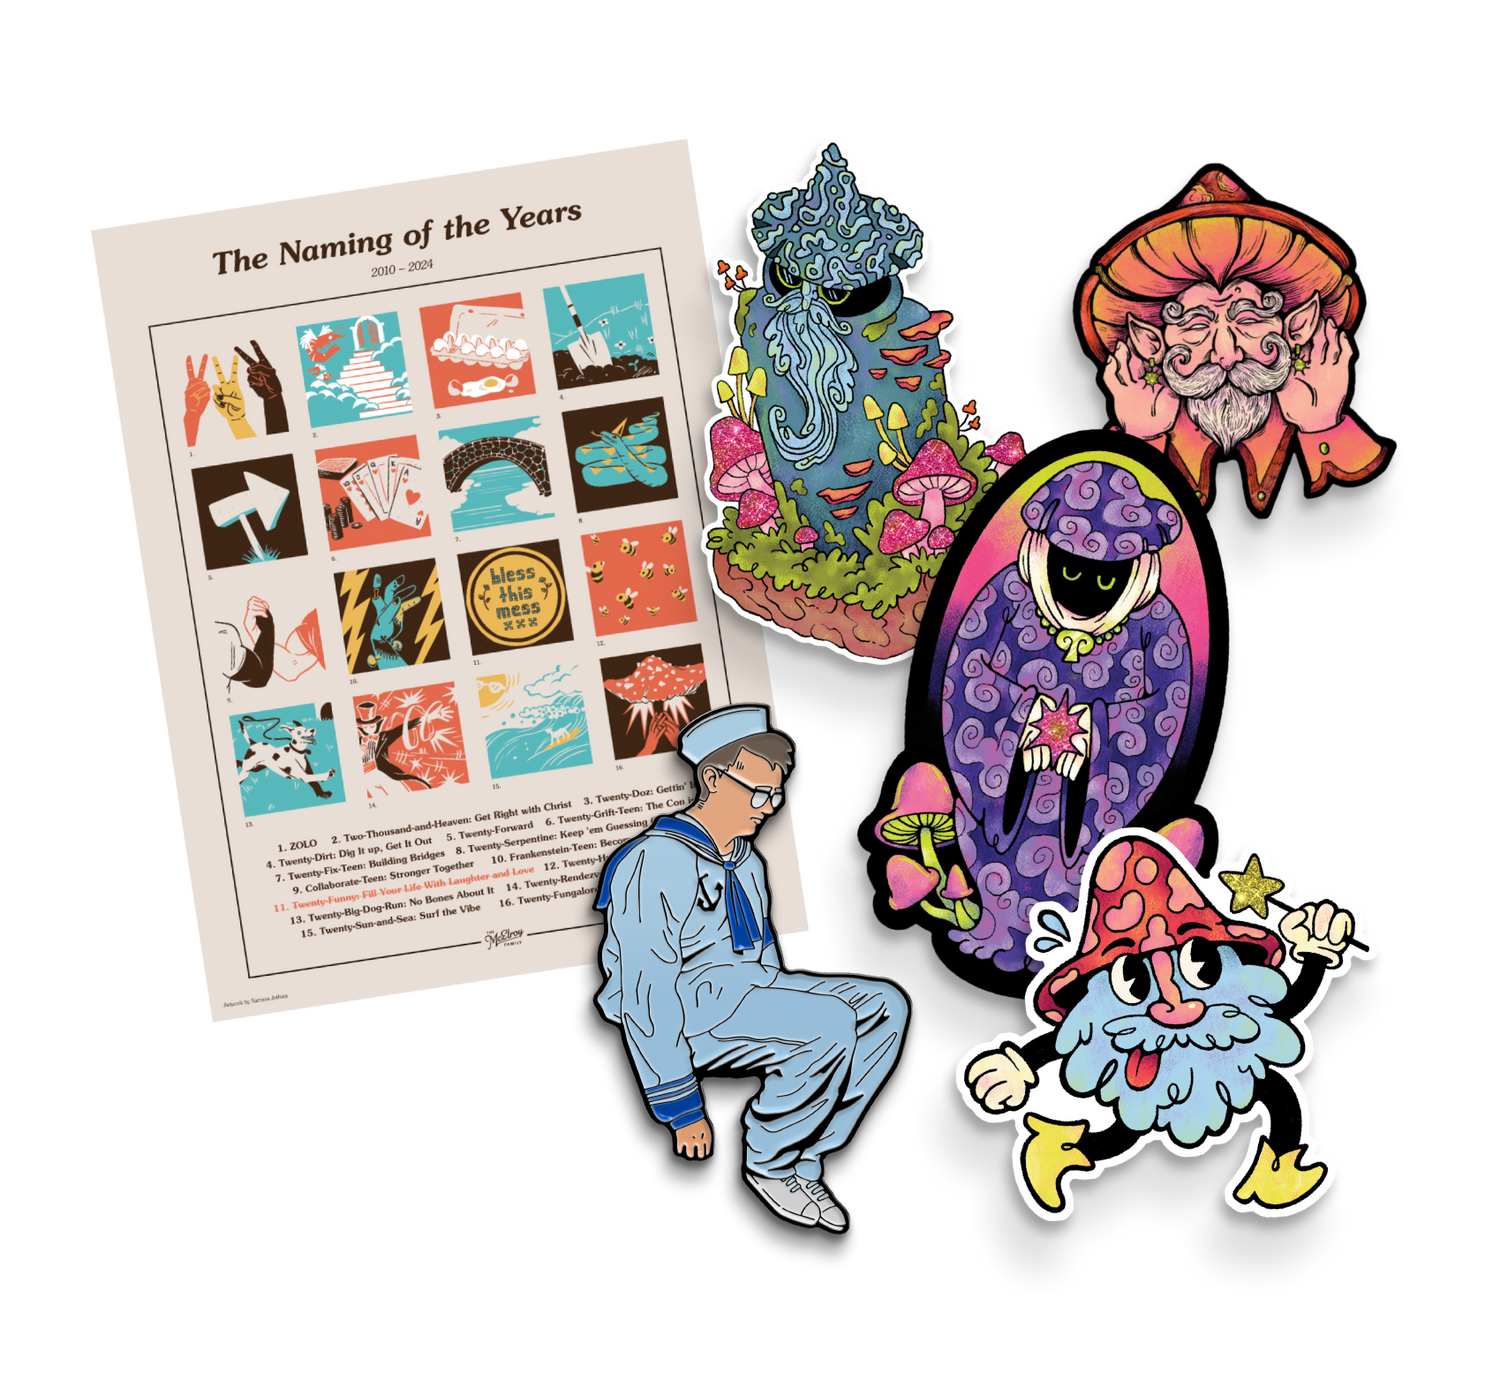 The March McElroy merch items. From left to right, there is a poster illustrating each Naming of the Year, a Little Sailor Man enamel pin, and a Fungalore sticker pack. 